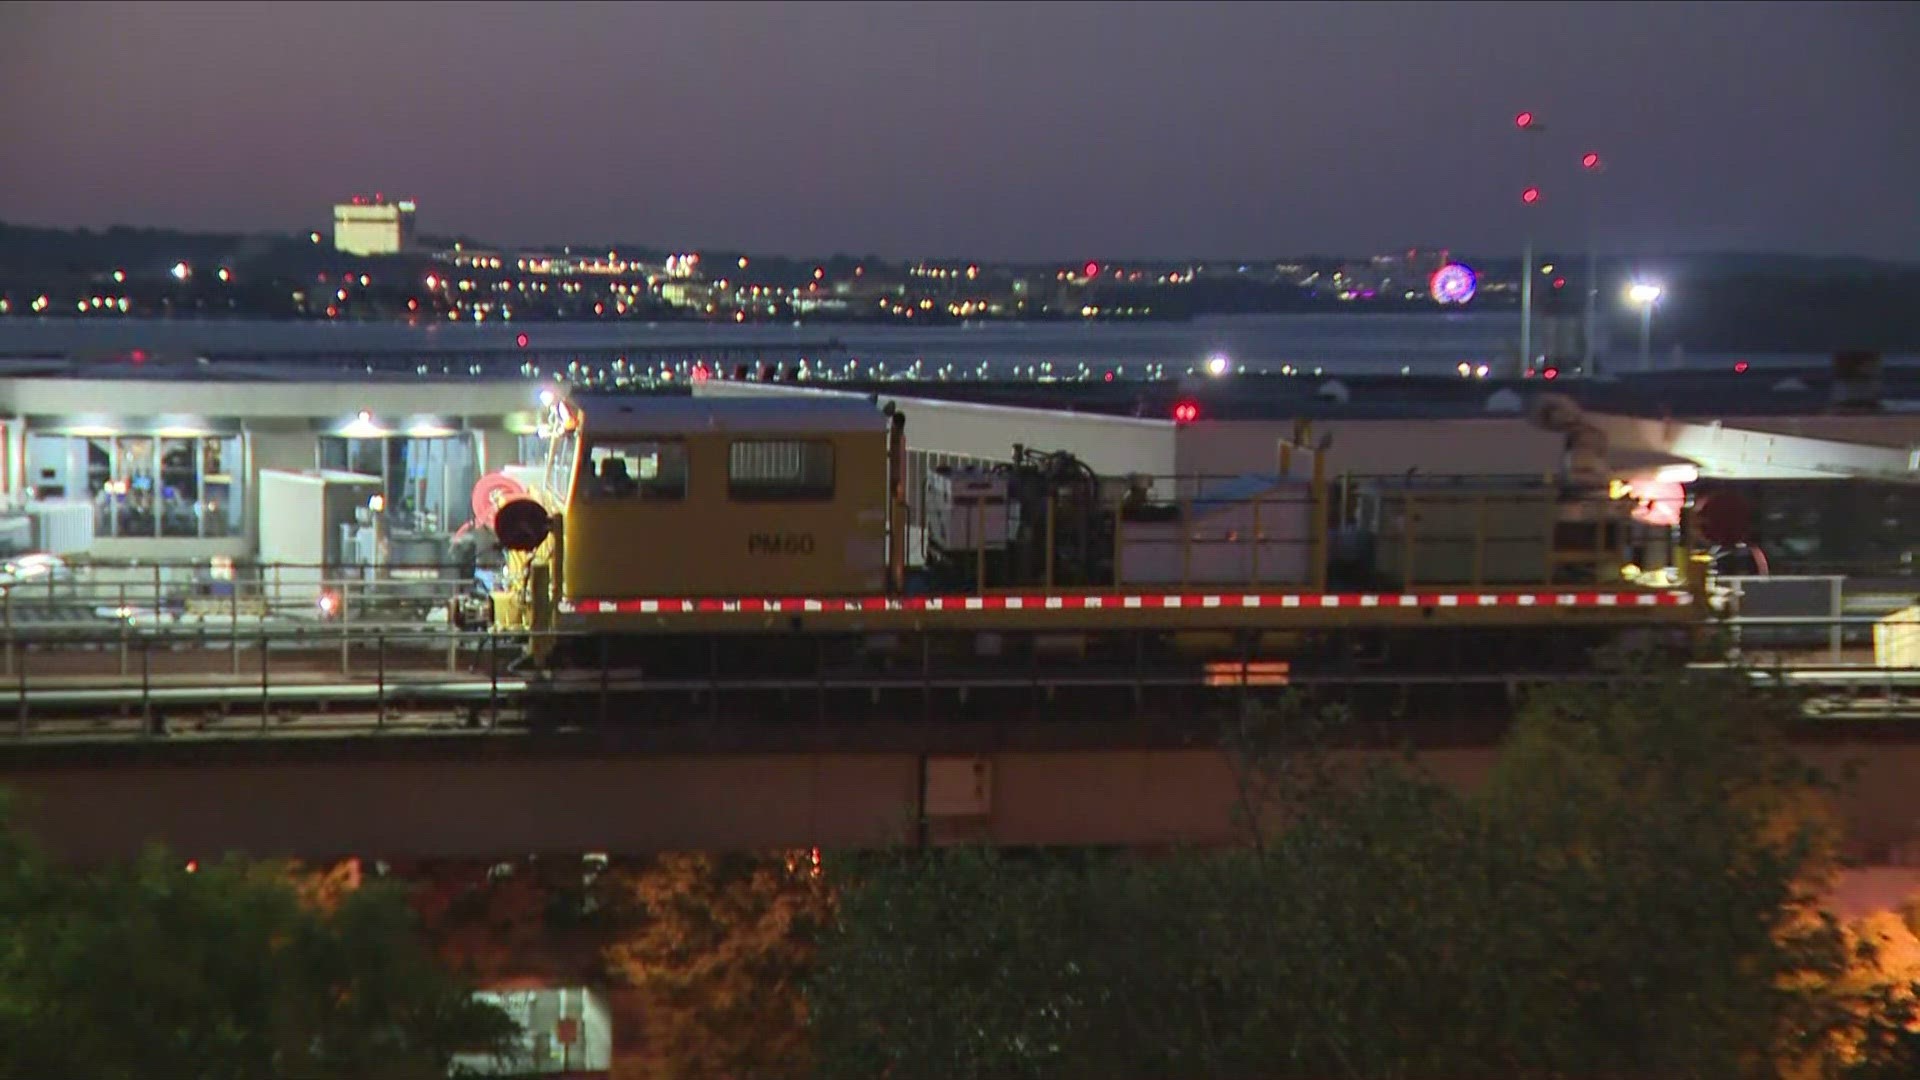 Morning commutes were impacted as WMATA continued to inspect and repair a portion of track on the Blue/Yellow Lines near National Airport after the derailment.